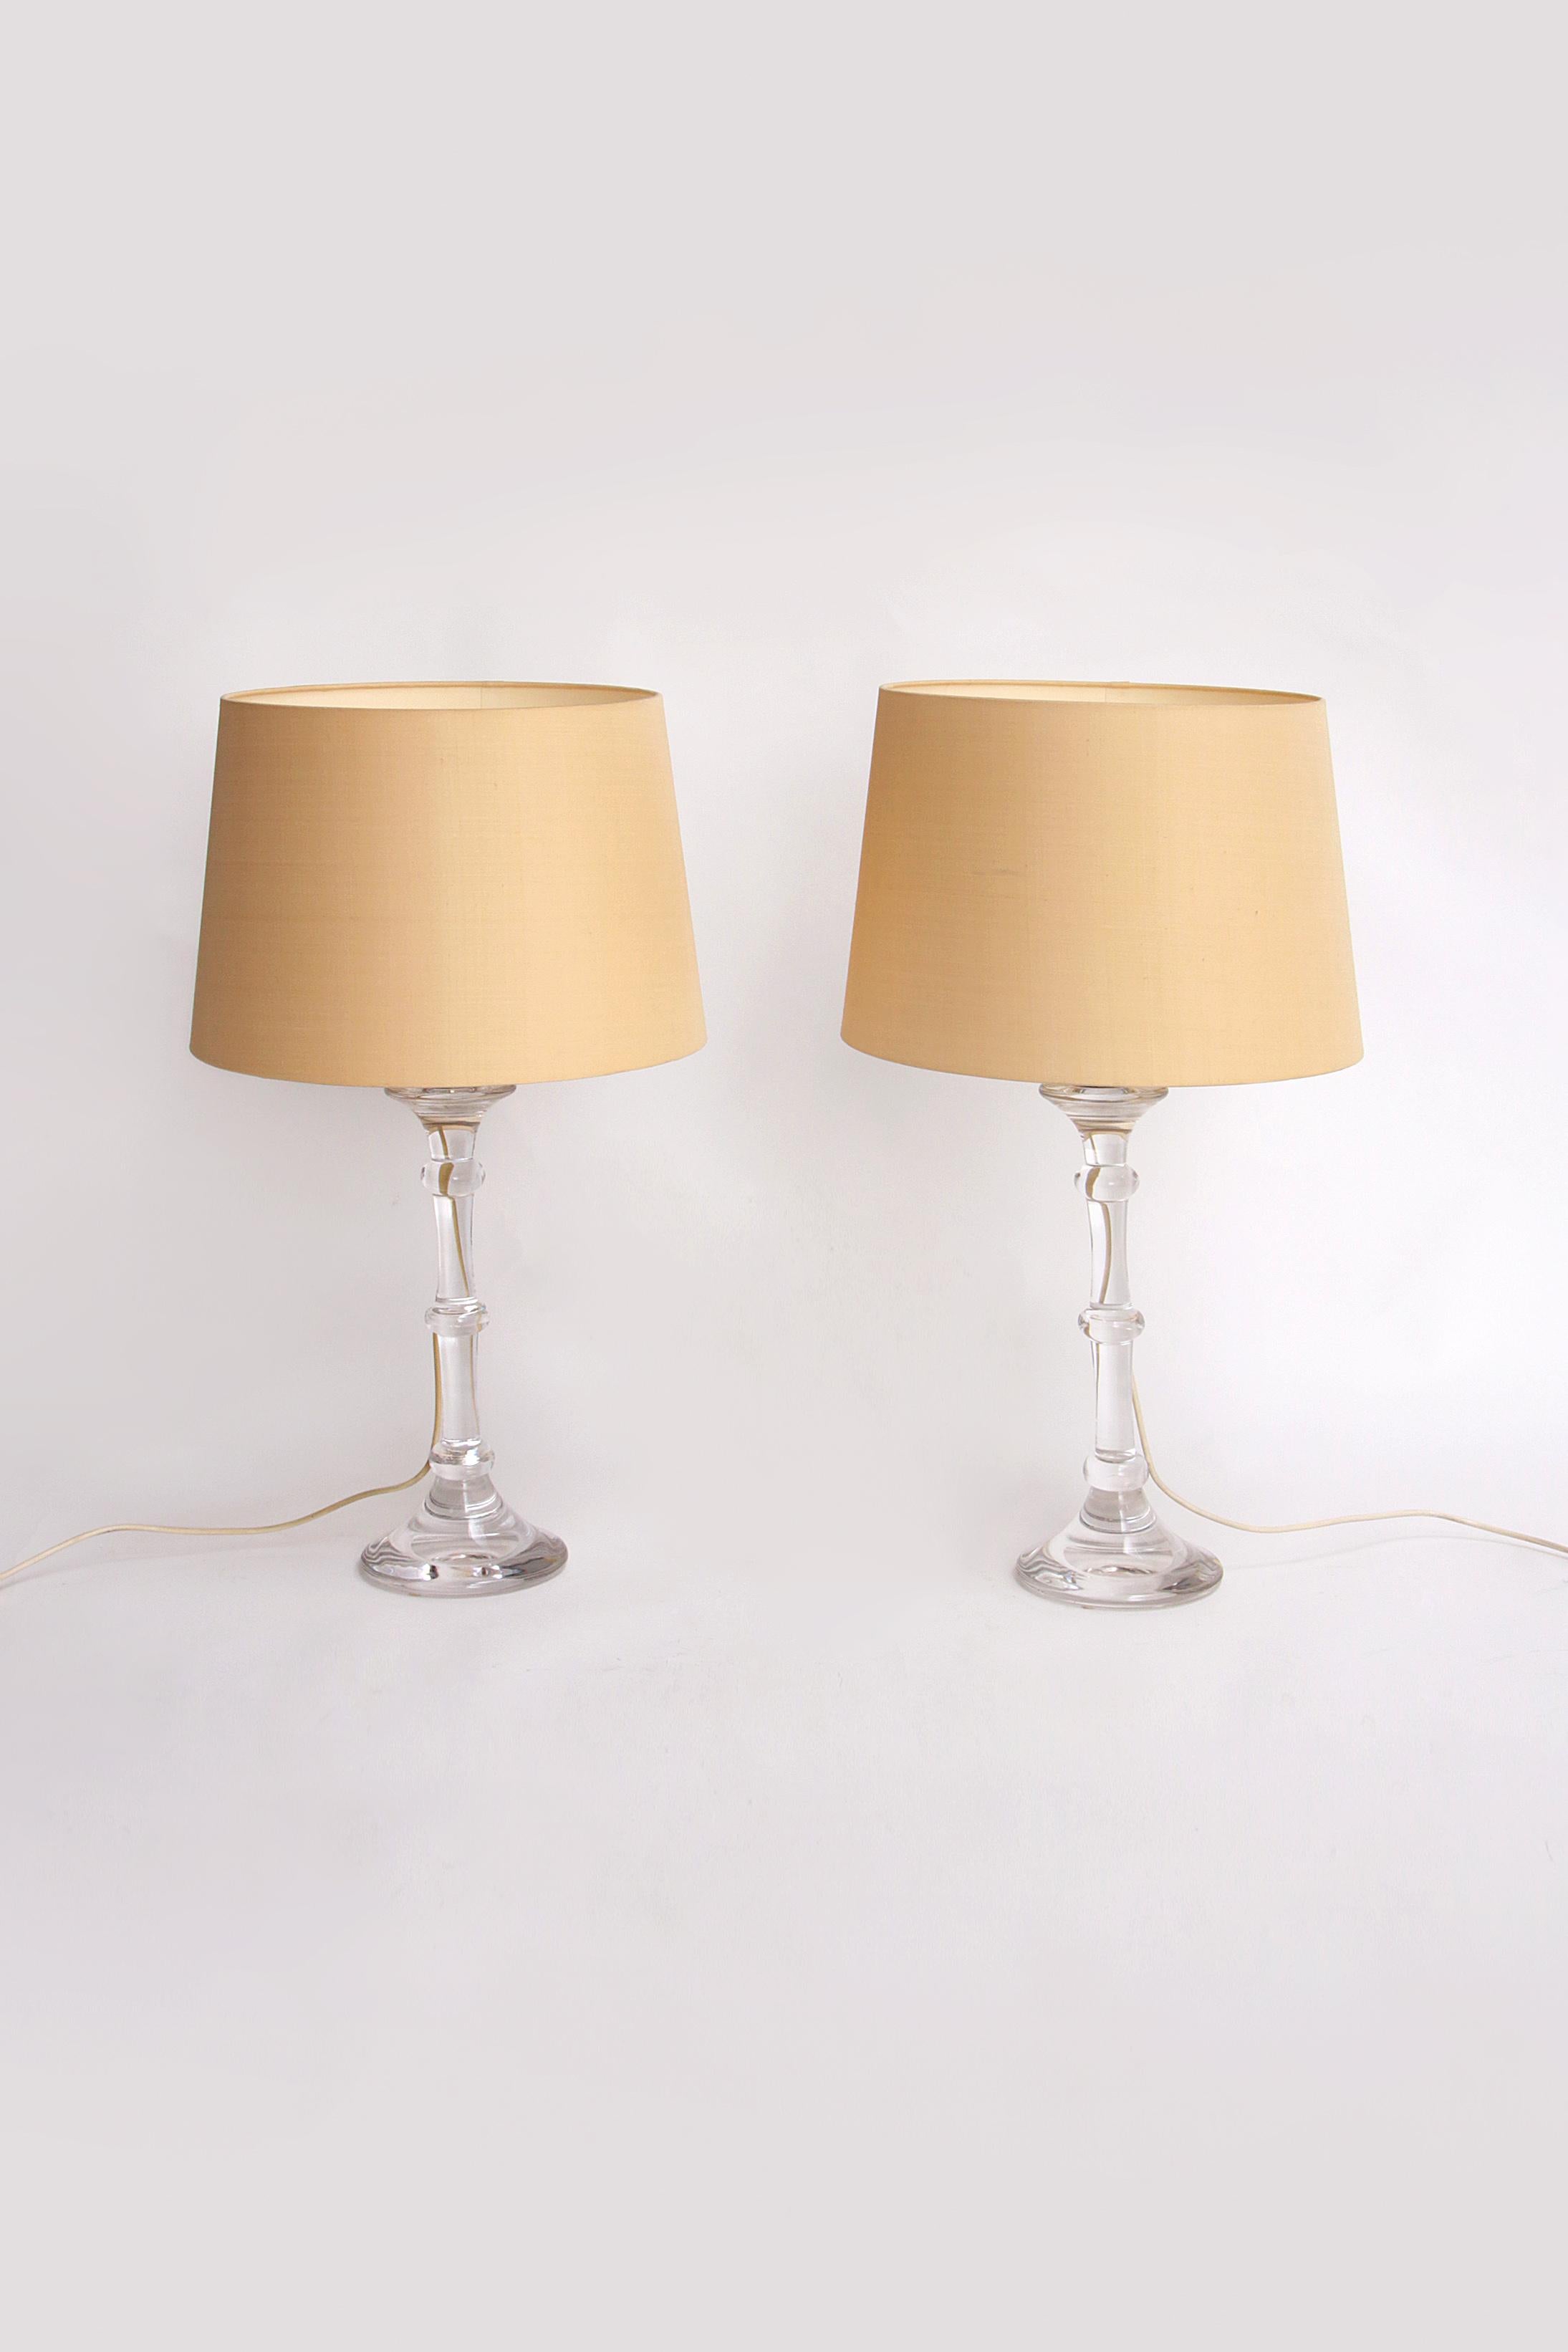 Mouth-blown designer lamp set with cream lampshades by Ingo Maurer, 1960


Discover the exclusivity and craftsmanship of Ingo Maurer with this beautiful set of mouth-blown designer lamps. These unique lamps are handmade from solid glass, giving them